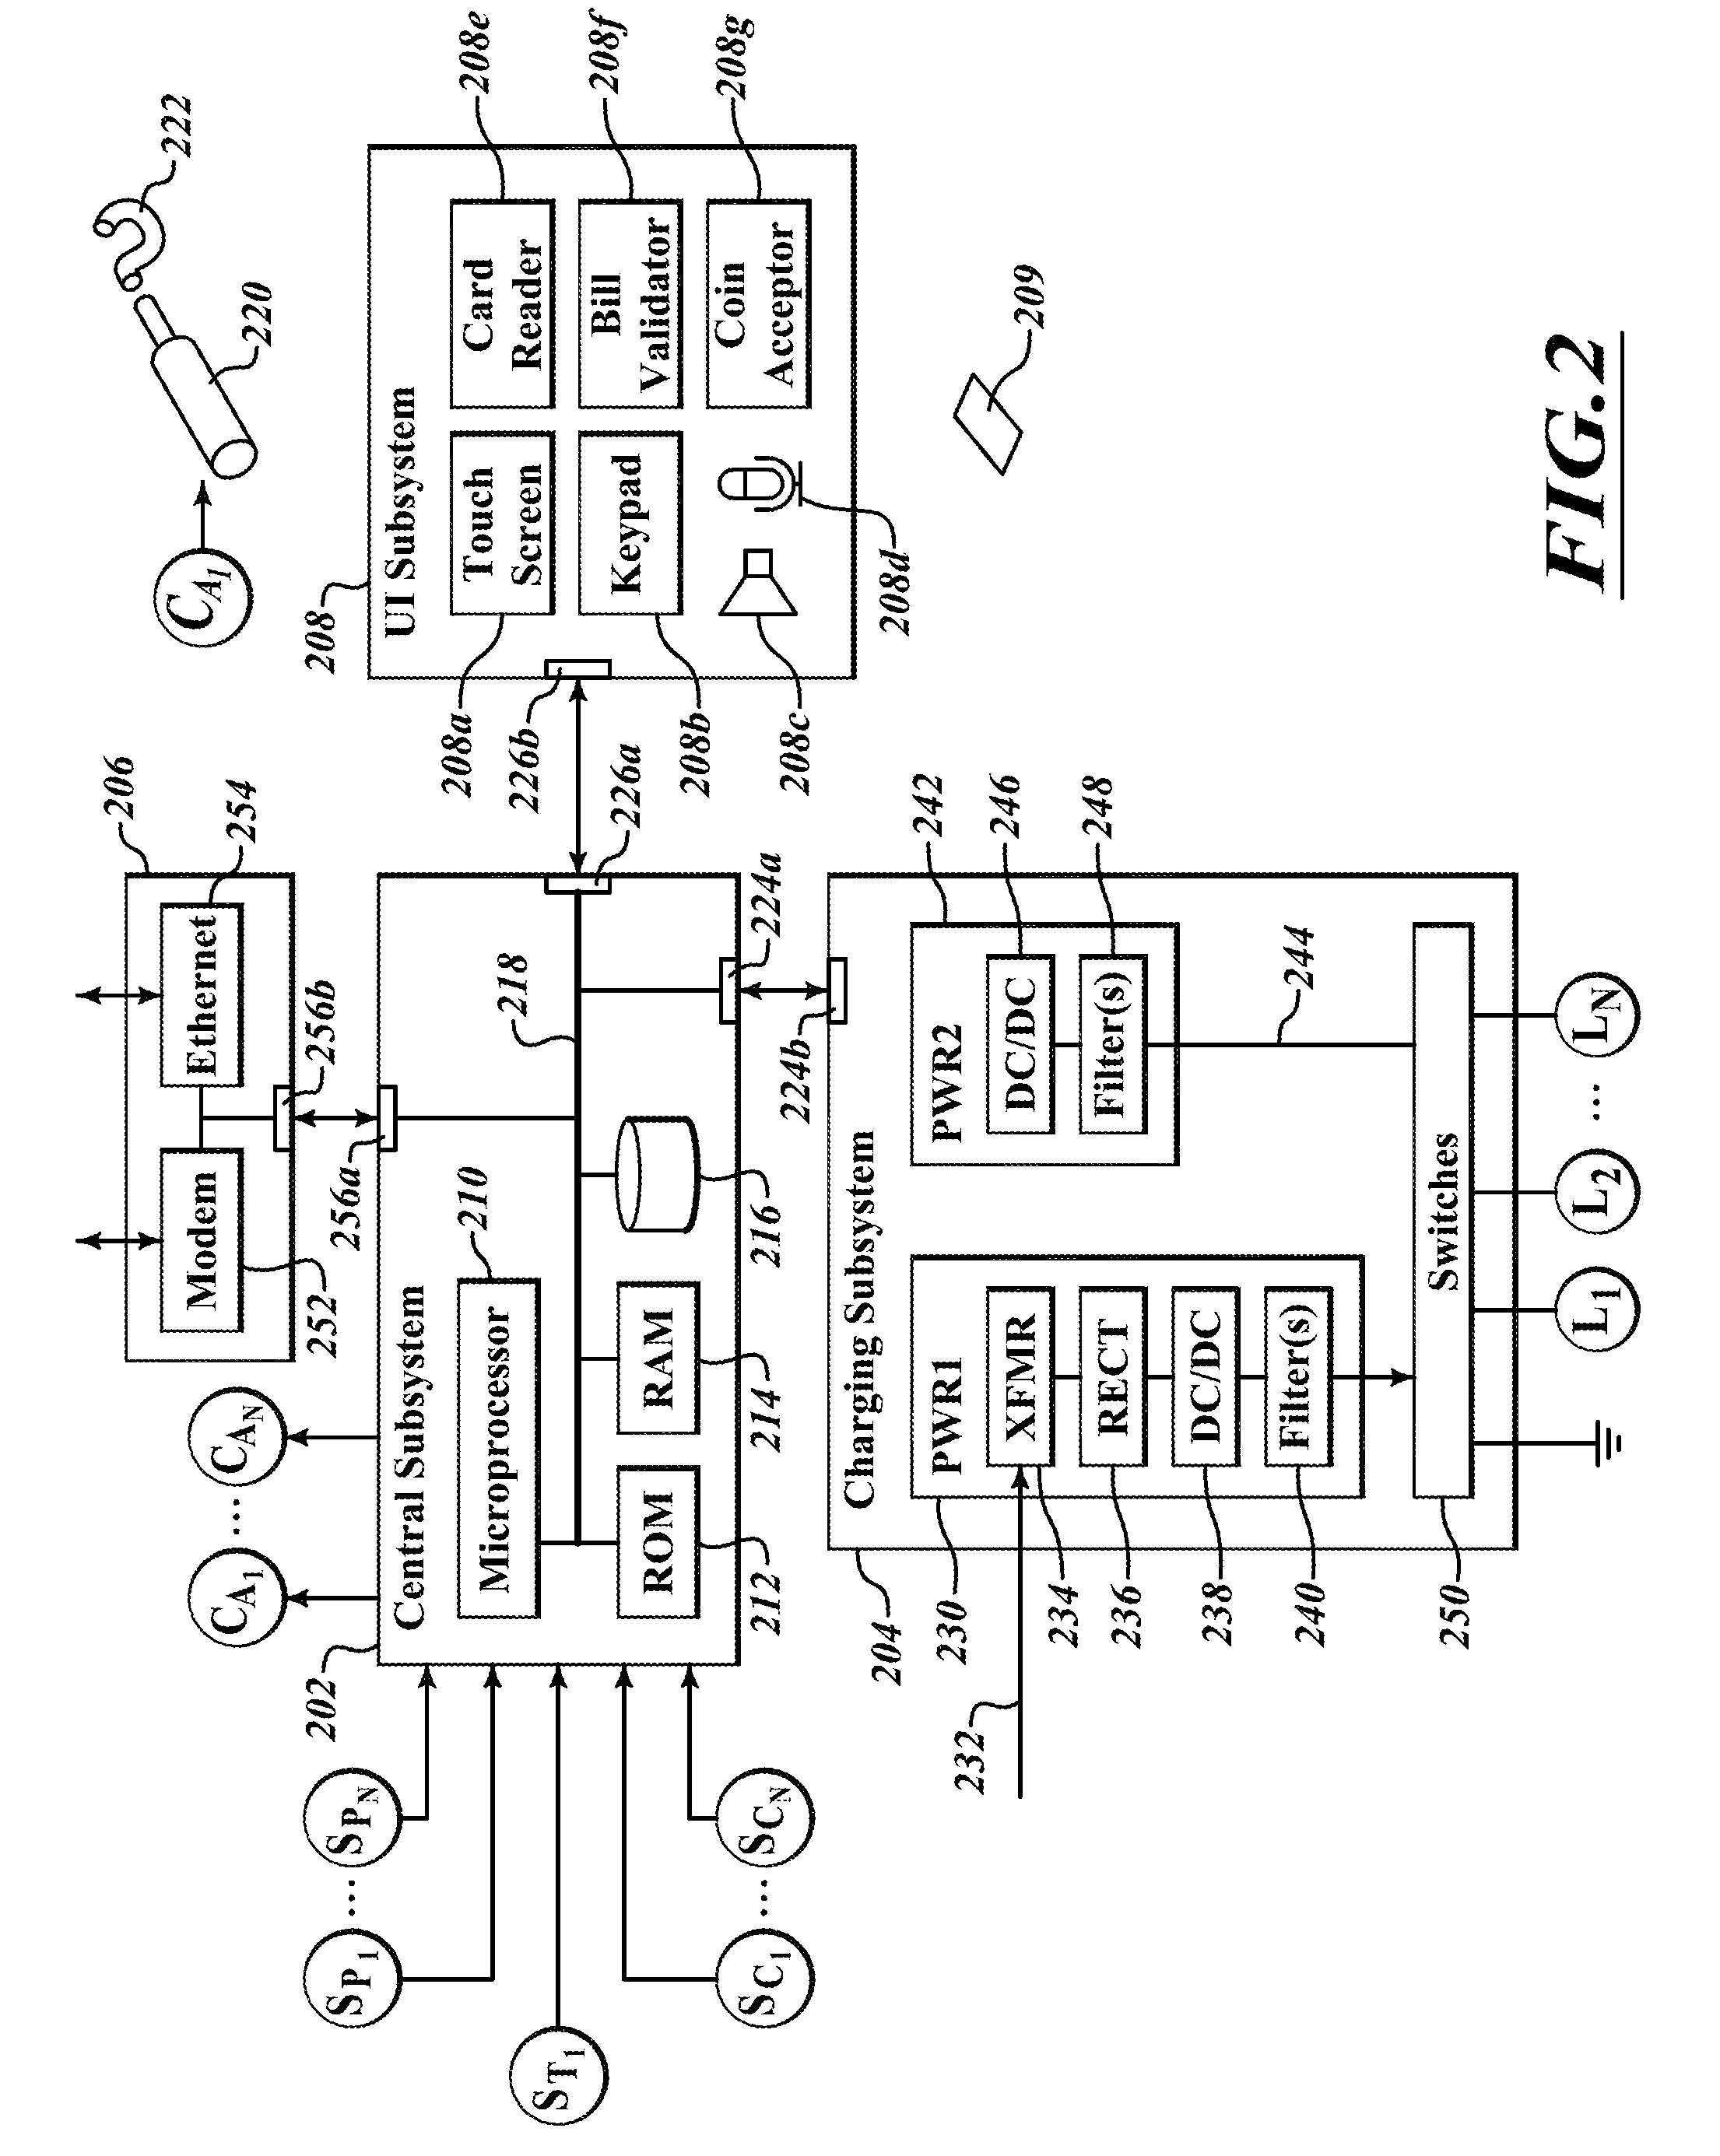 Apparatus, method and article for collection, charging and distributing power storage devices, such as batteries